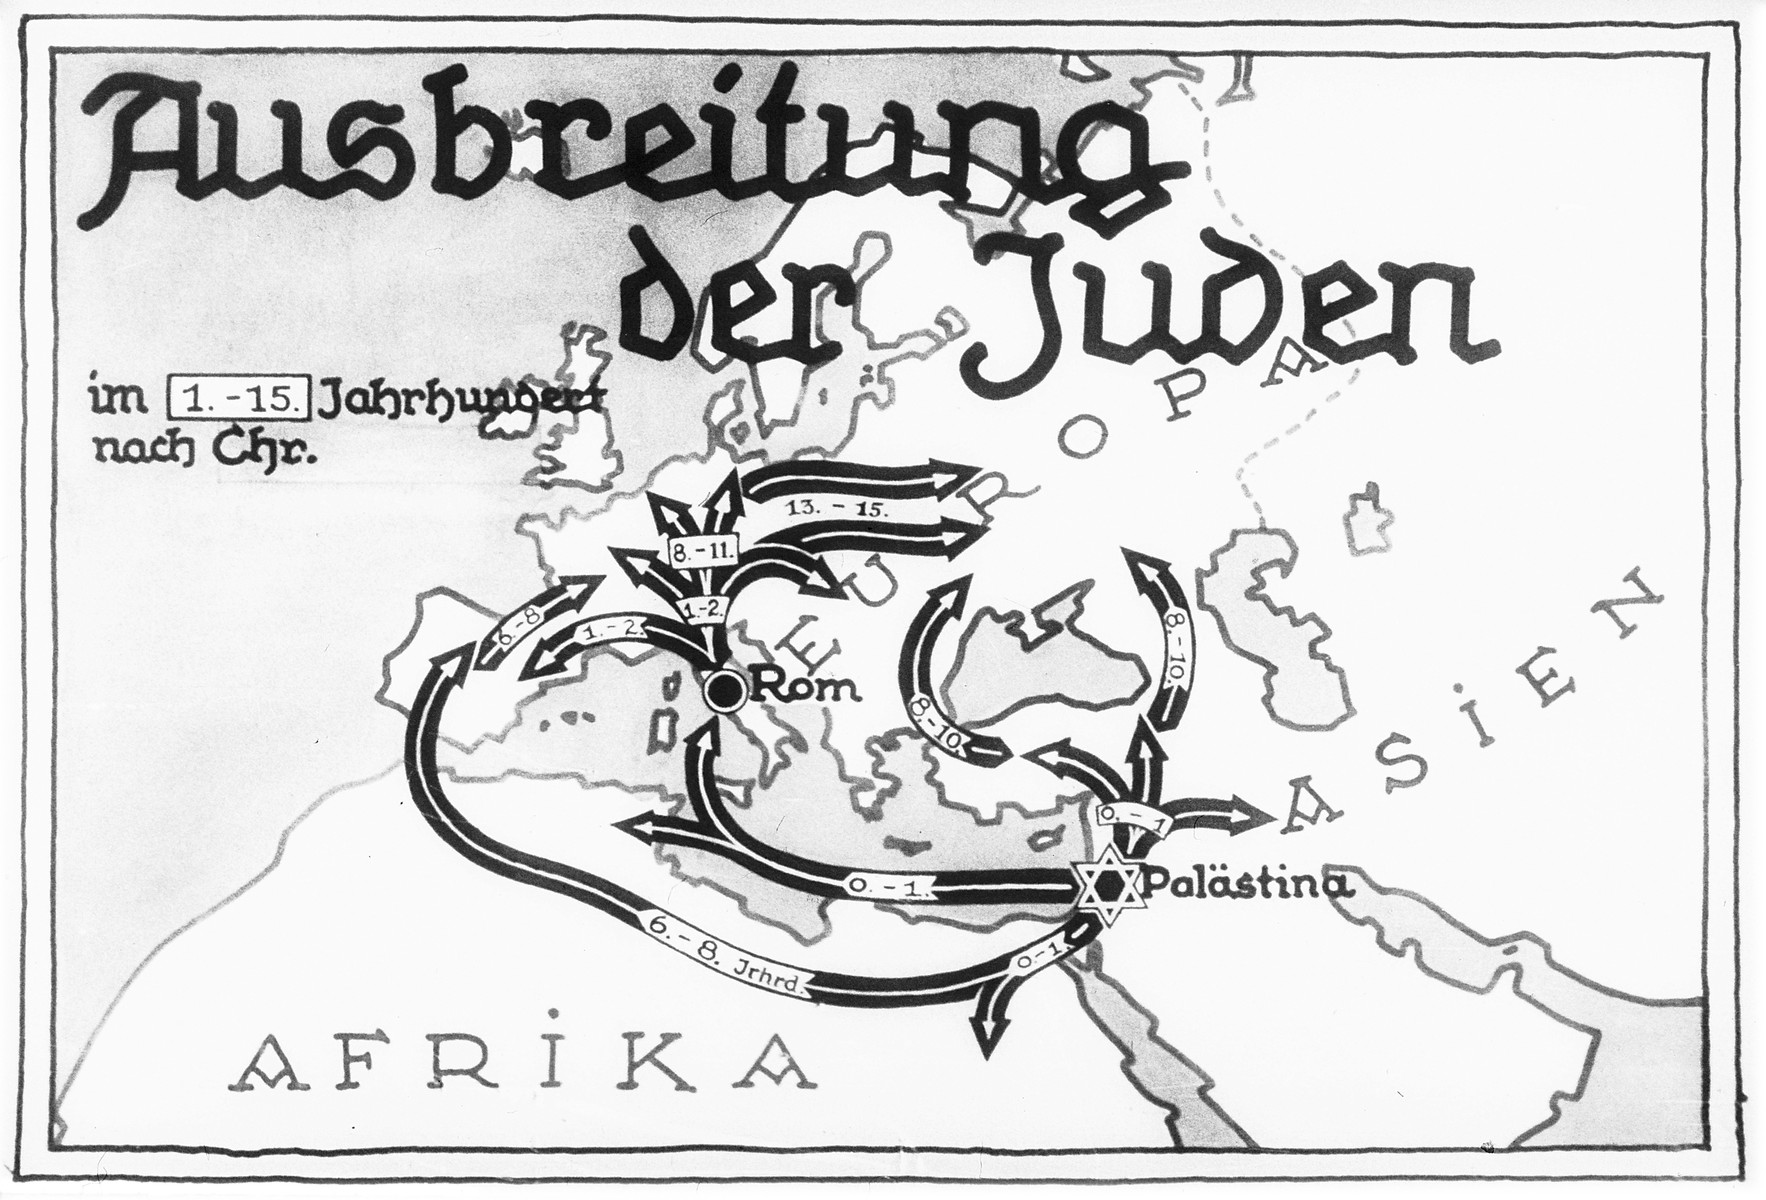 Propaganda slide entitled "The spreading of the Jews," featuring a map illustrating the expansion of the Jewish population in the 1,500 years since the birth of Christ.